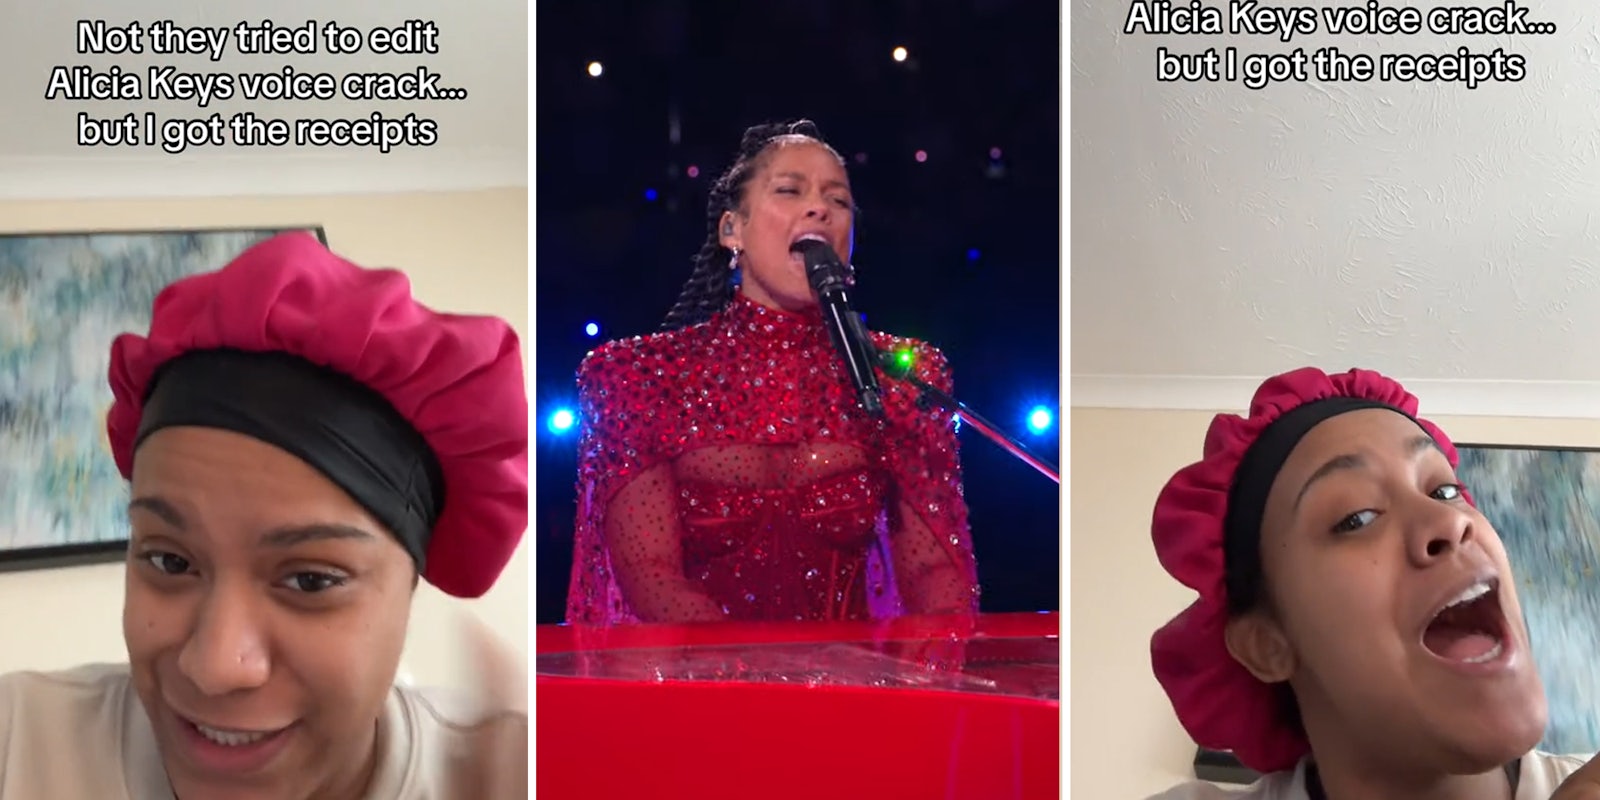 People think the Super Bowl edited out Alicia Keys' voice cracking during performance